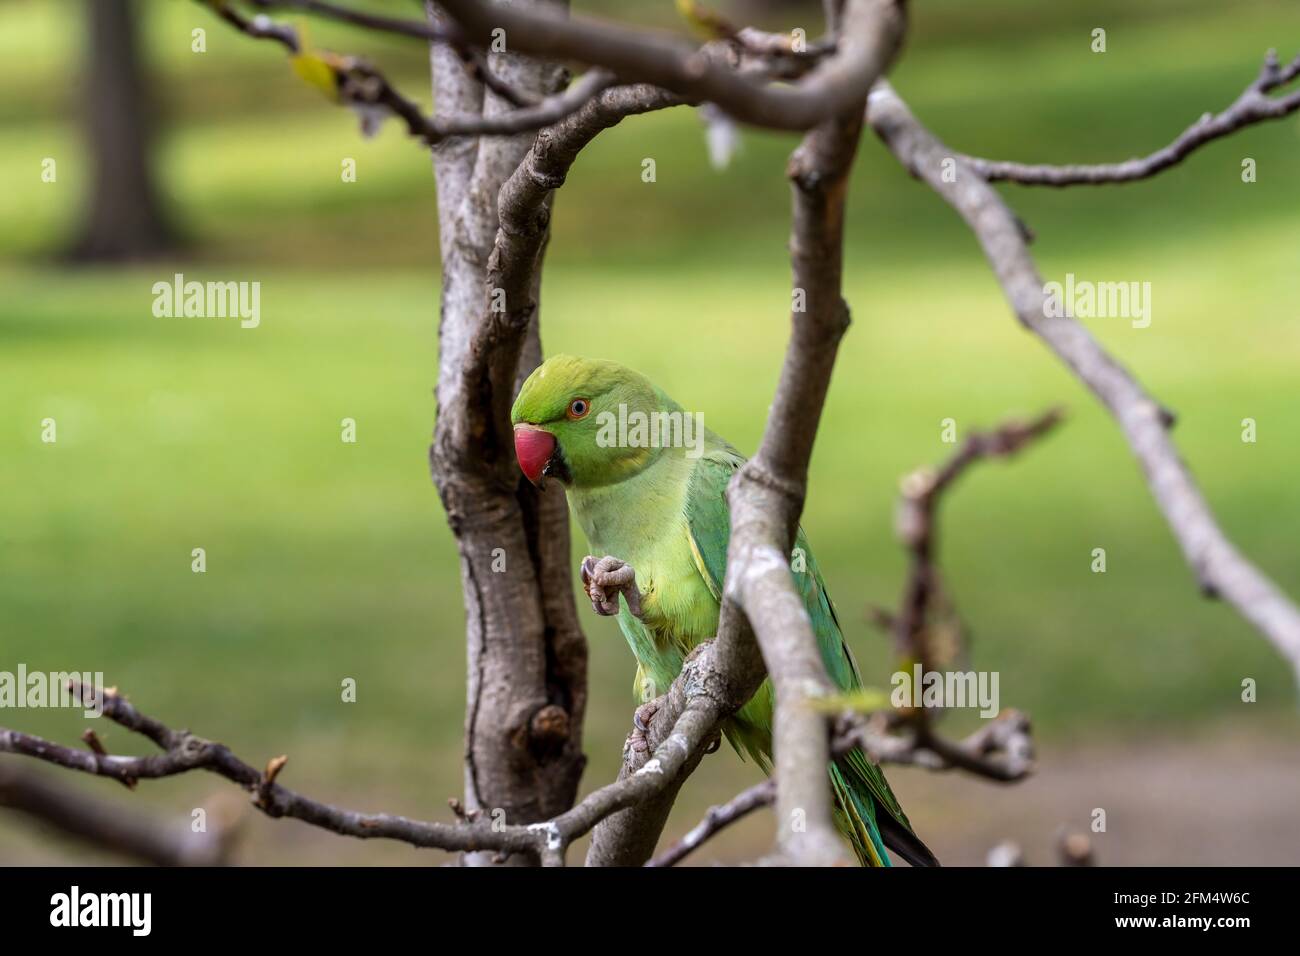 Closeup and detailed portrait view of a Rose-ringed parakeet (Psittacula krameri) perched on a tree. Stock Photo